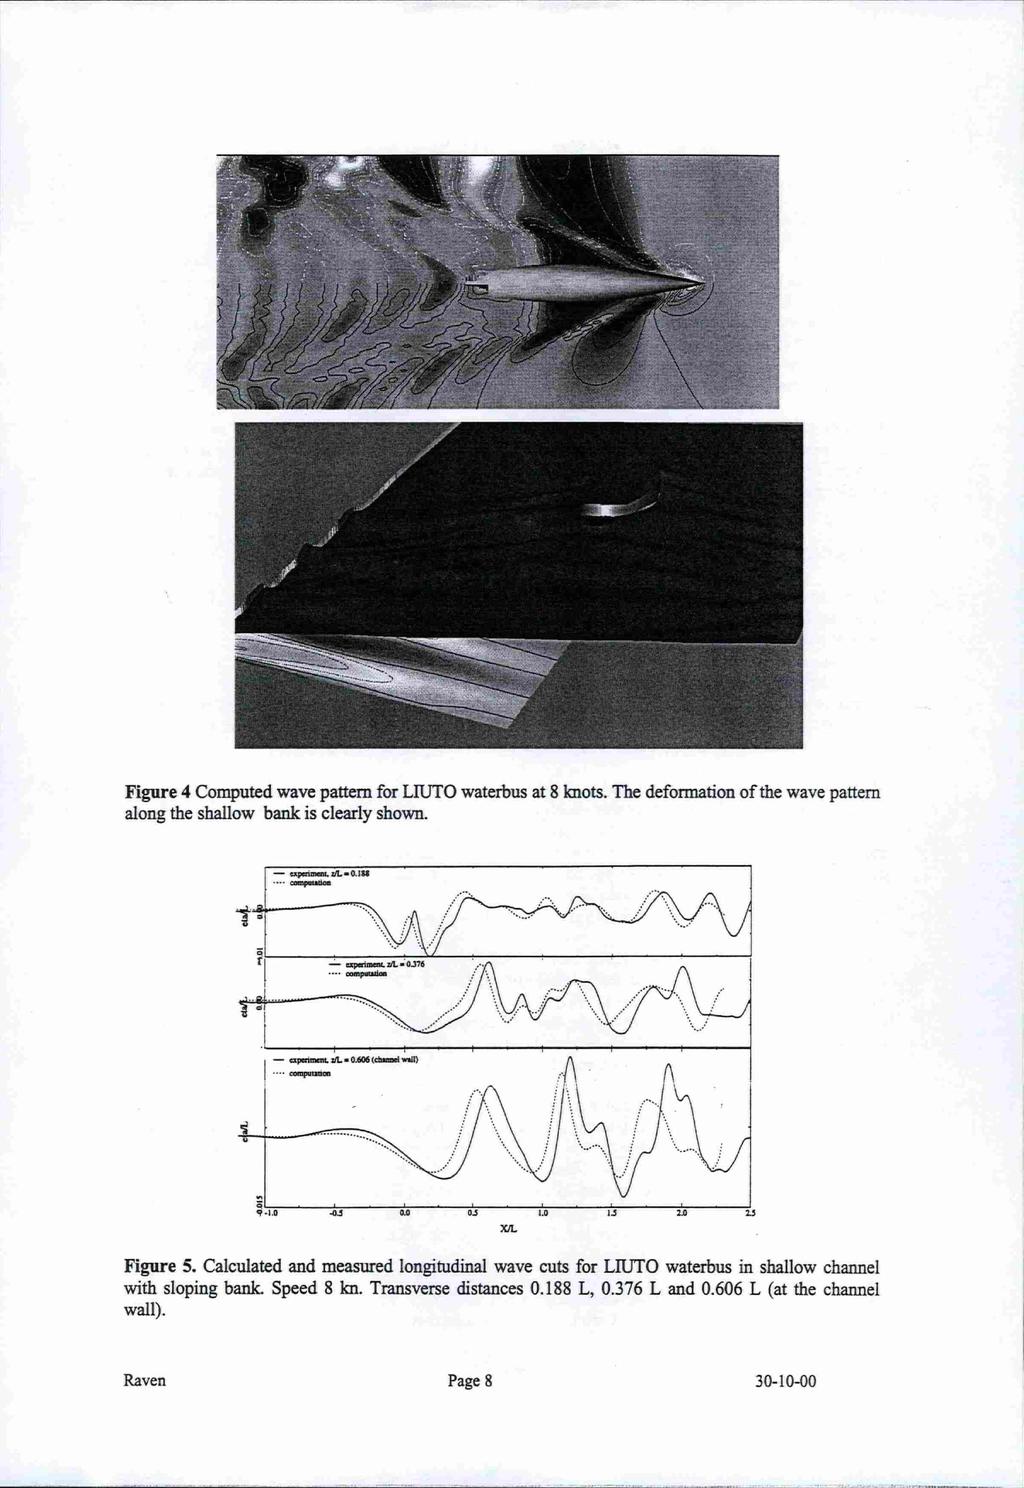 Figure 4 Computed wave pattern for LIUTO waterbus at 8 knots. The deformation of the wave pattern along the shallow bank is clearly shown. e.nerunent. 0.188 0376 upenment ill.. 0.606 (charmei vr.